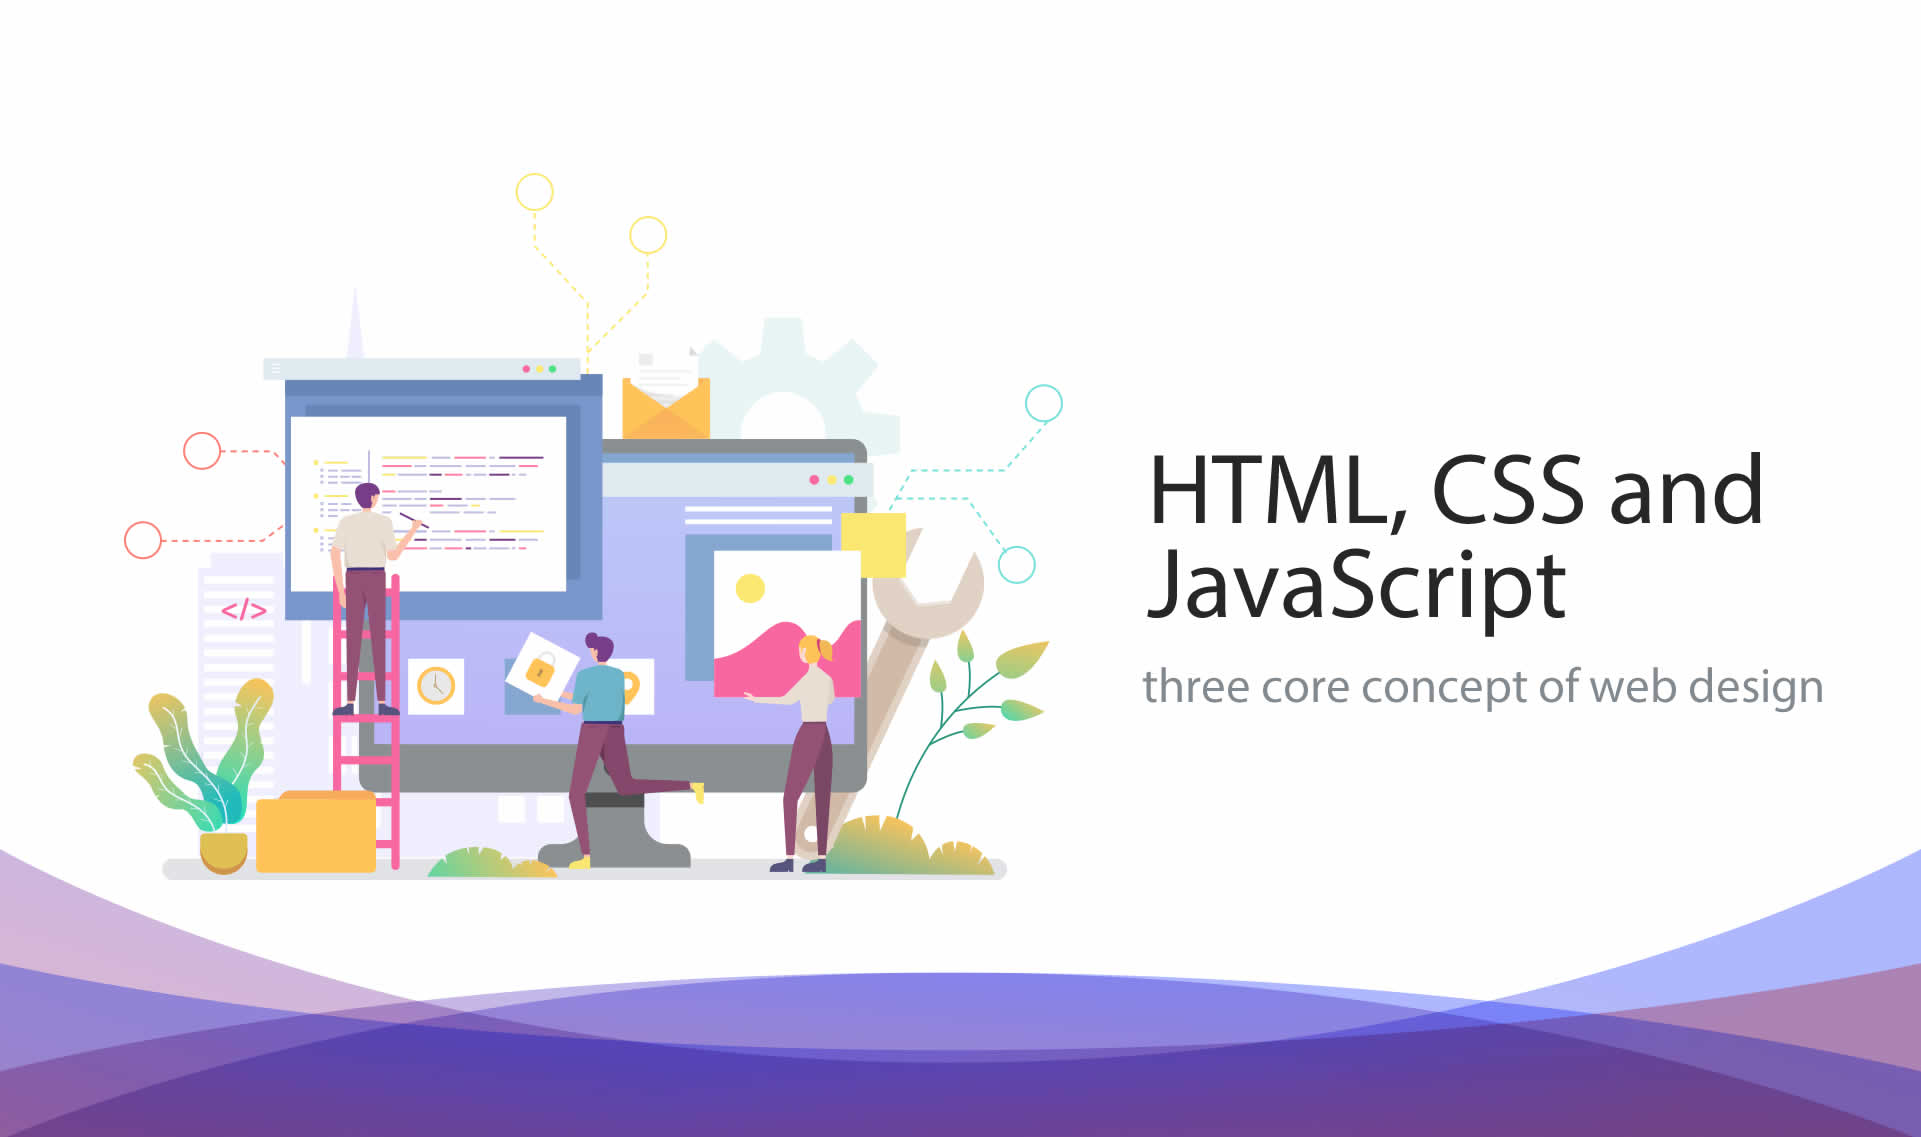 HTML, CSS and JavaScript, three core concept of web design